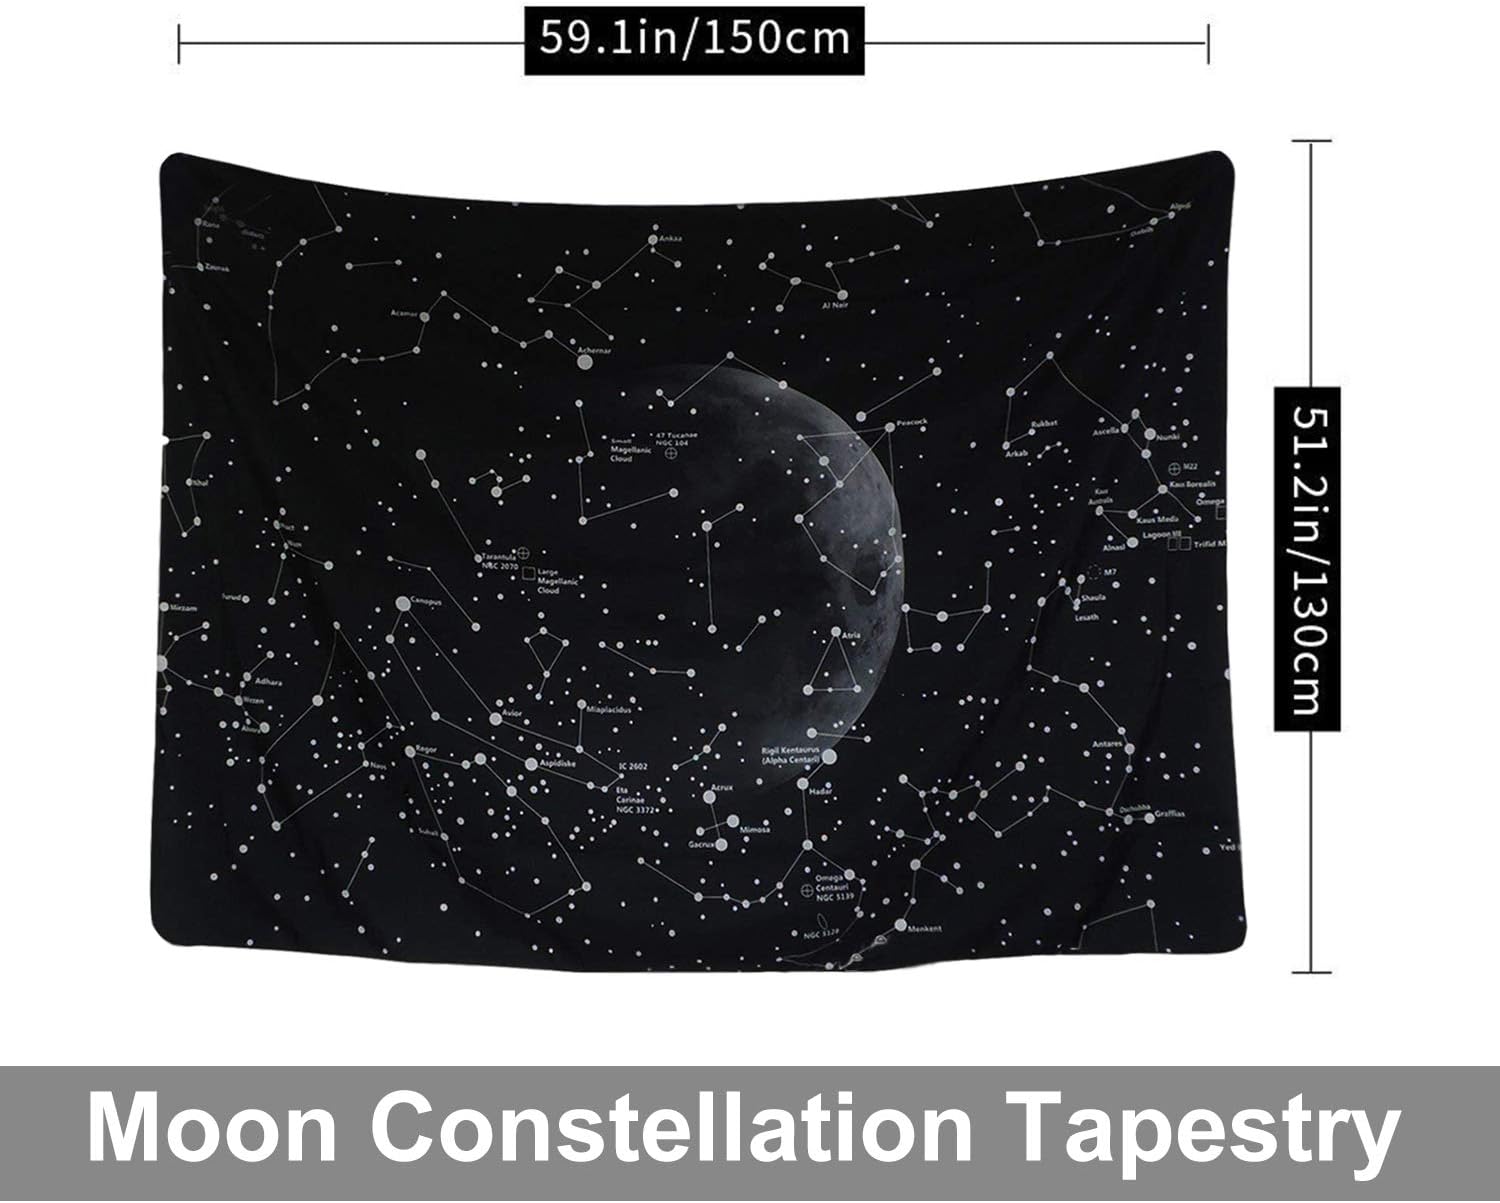 Tapestry Wall Hanging Tapestries Wall Blanket Wall Art Wall Decor Astrology Galaxy Starry Night Sky Bohemian Beach Indian Wall Decor for Bedroom Living Room Dorm(59.1 x 51.2, Moon Constellations)